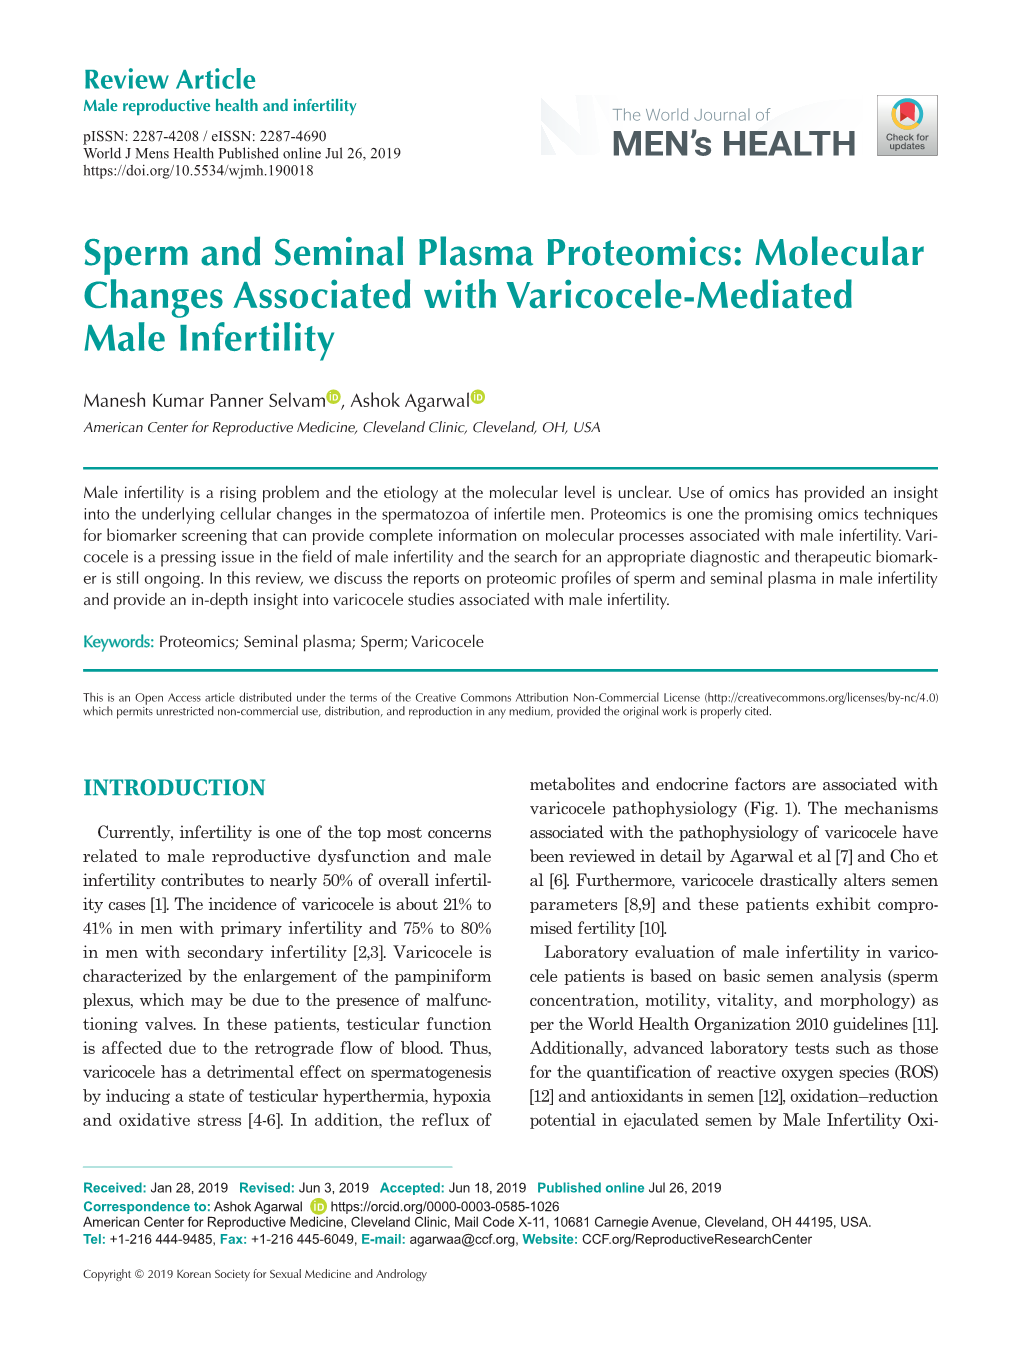 Sperm and Seminal Plasma Proteomics: Molecular Changes Associated with Varicocele-Mediated Male Infertility